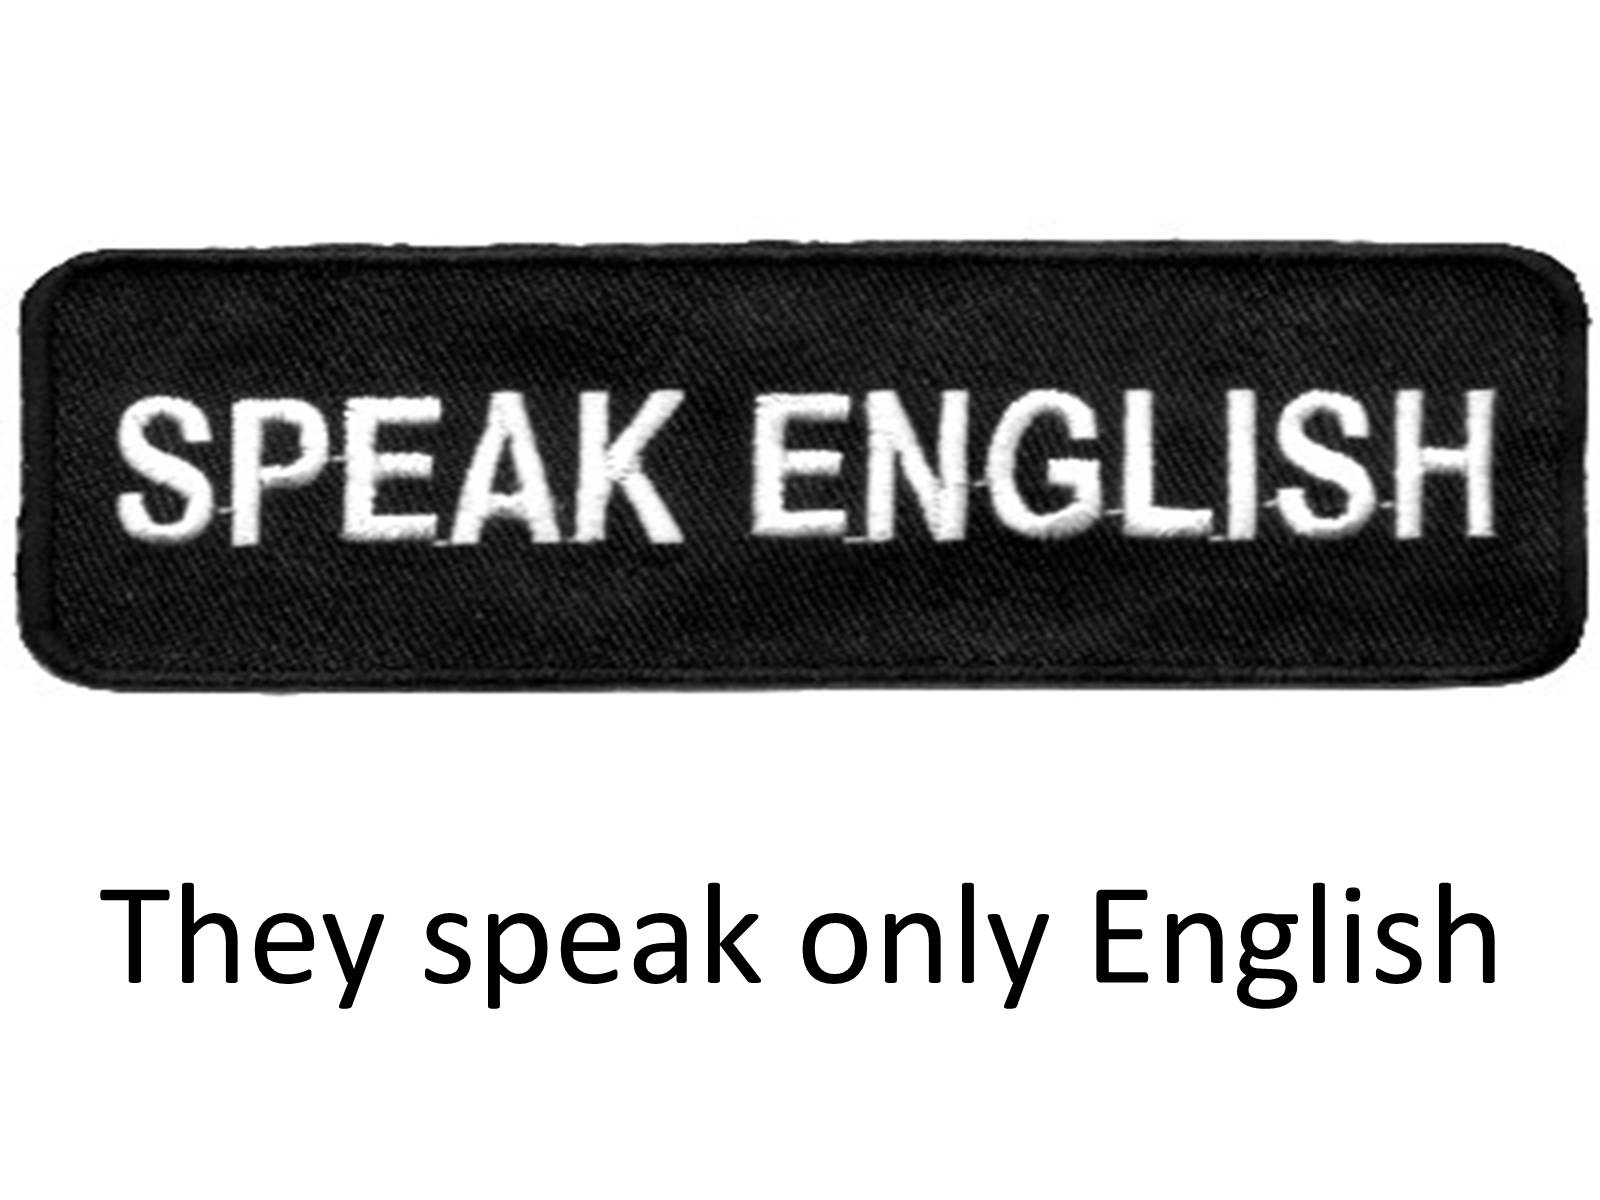 They to speak english now. English only. We only speak English. Табличка English only.